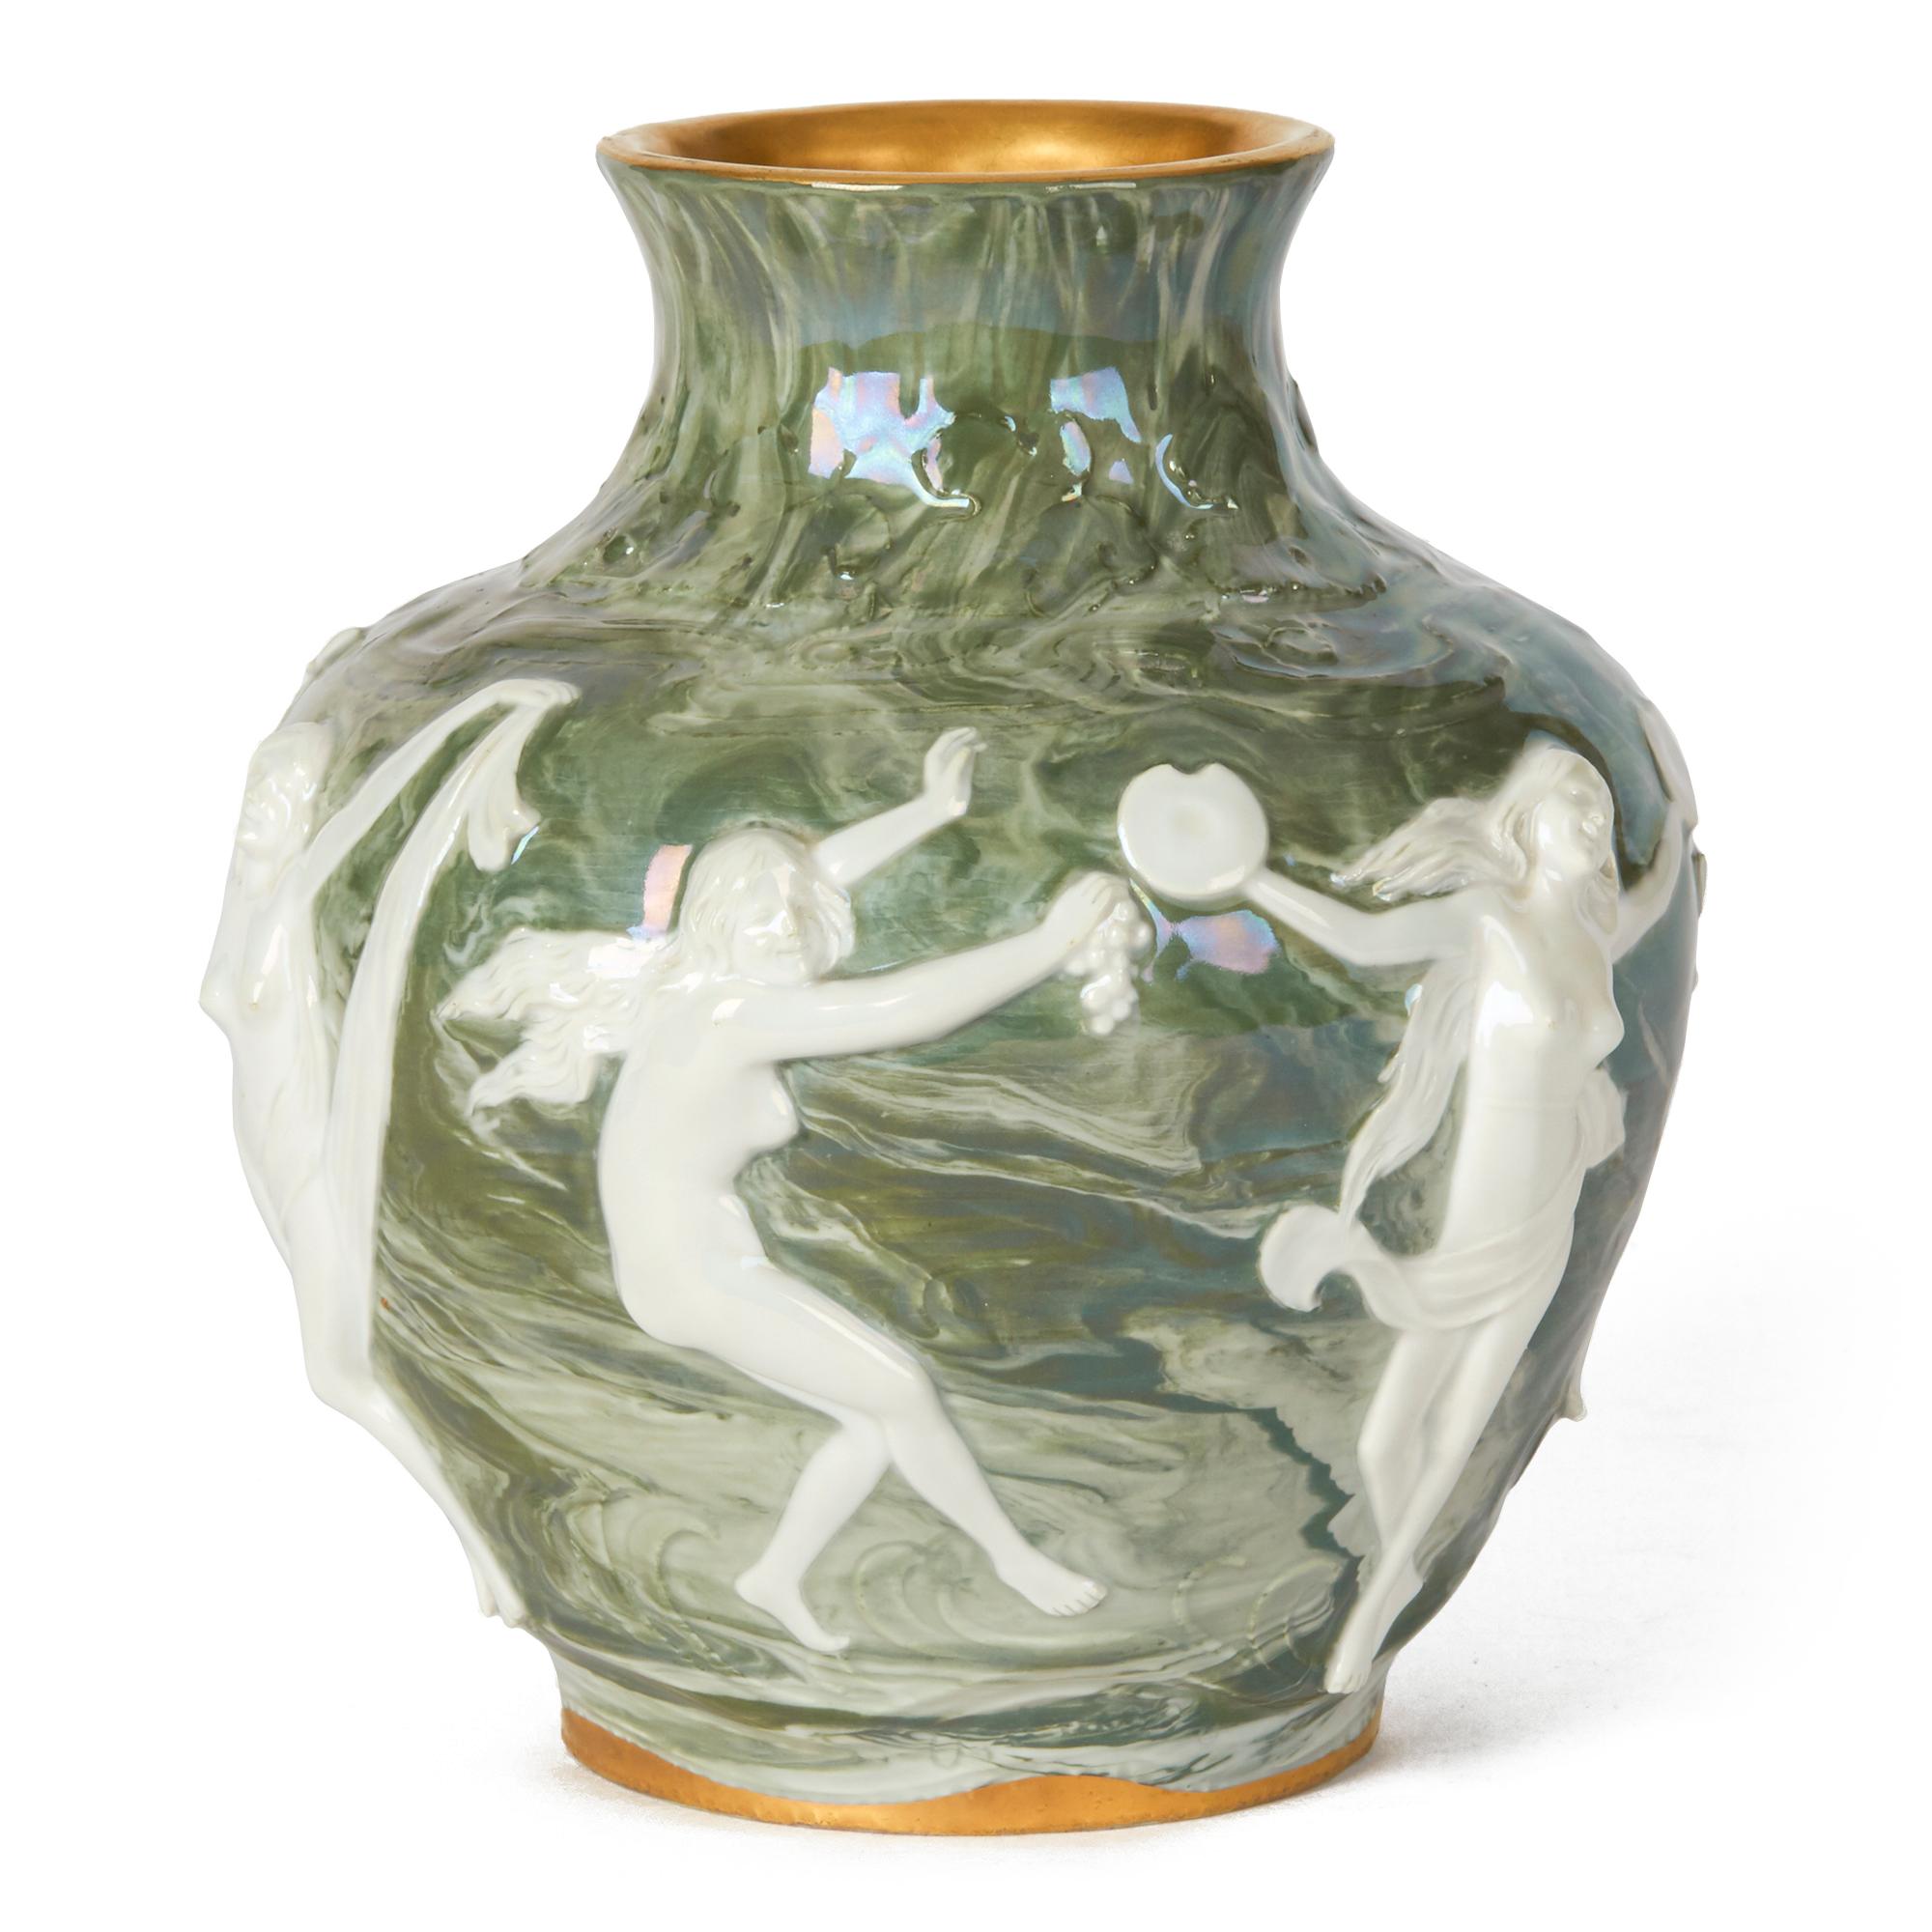 Adolph Oppel Kronach Art Nouveau Pottery Vase with Maidens, circa 1900 In Good Condition For Sale In Bishop's Stortford, Hertfordshire